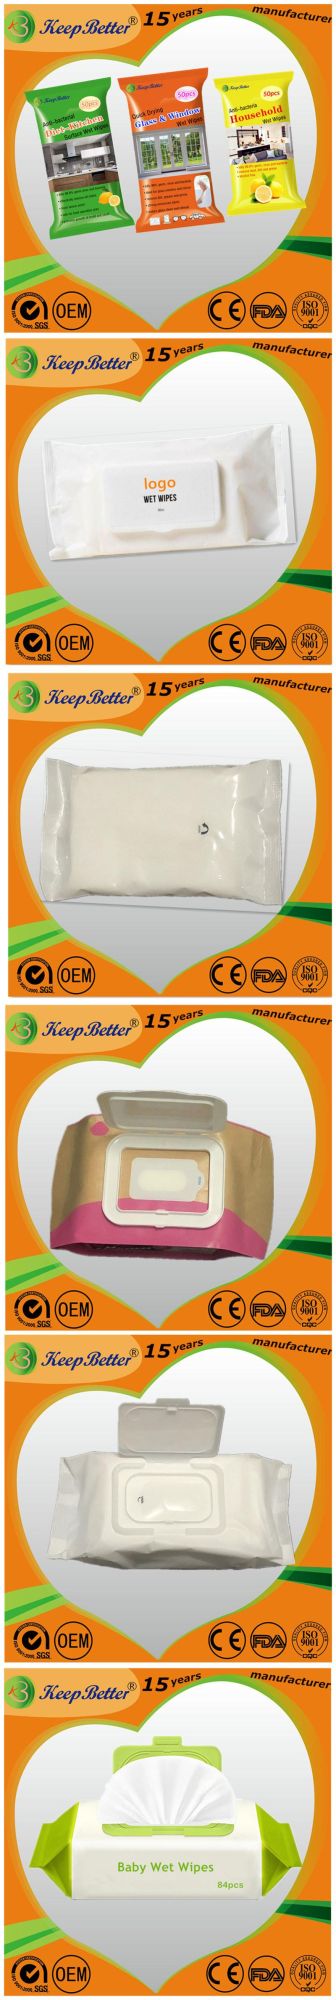 Wholesale High Quality Glass Cleaning Wet Wipes Manufacturer From China